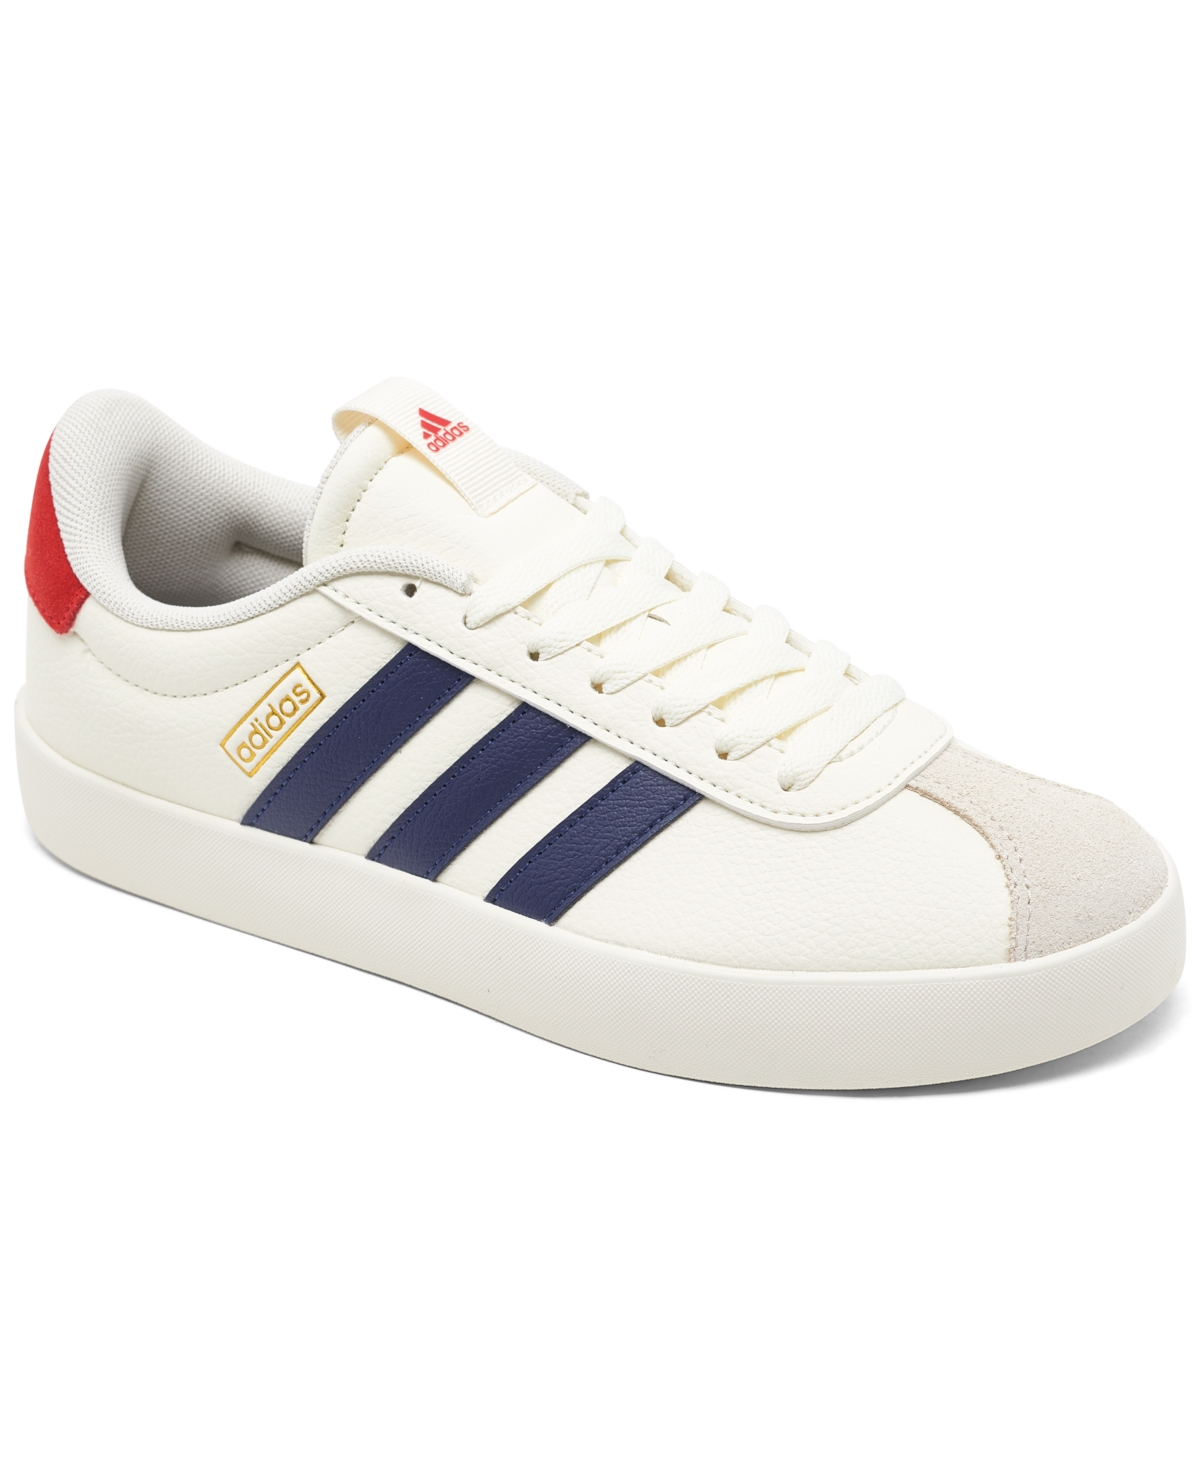 ADIDAS ORIGINALS WOMEN'S VL COURT 3.0 CASUAL SNEAKERS FROM FINISH LINE